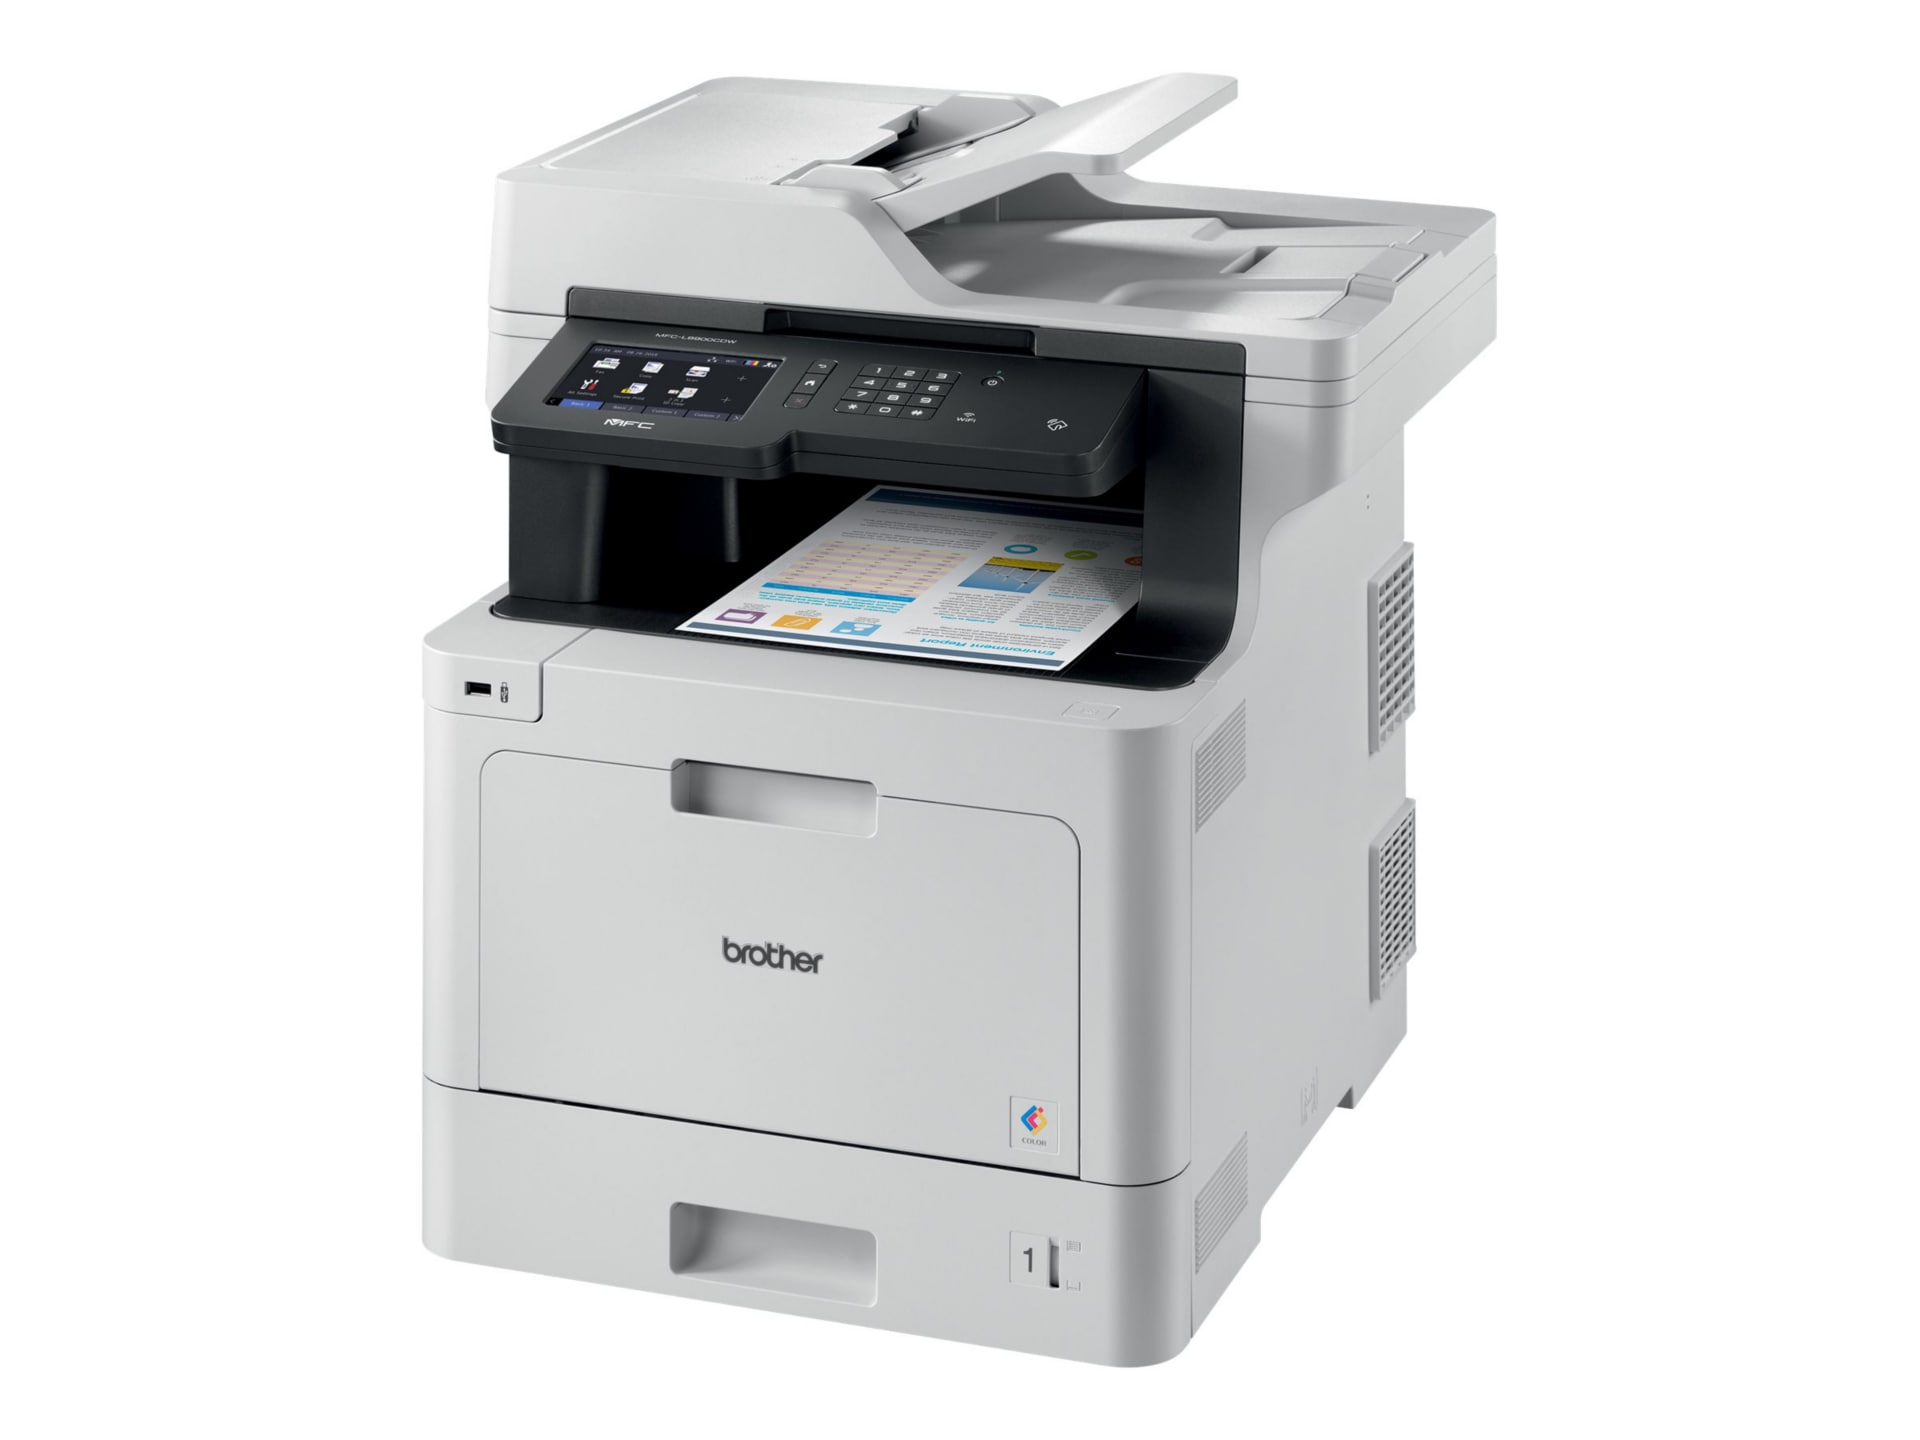 School Girl Xerox Video - Brother MFC-L8900CDW - multifunction printer - color - MFCL8900CDW - -